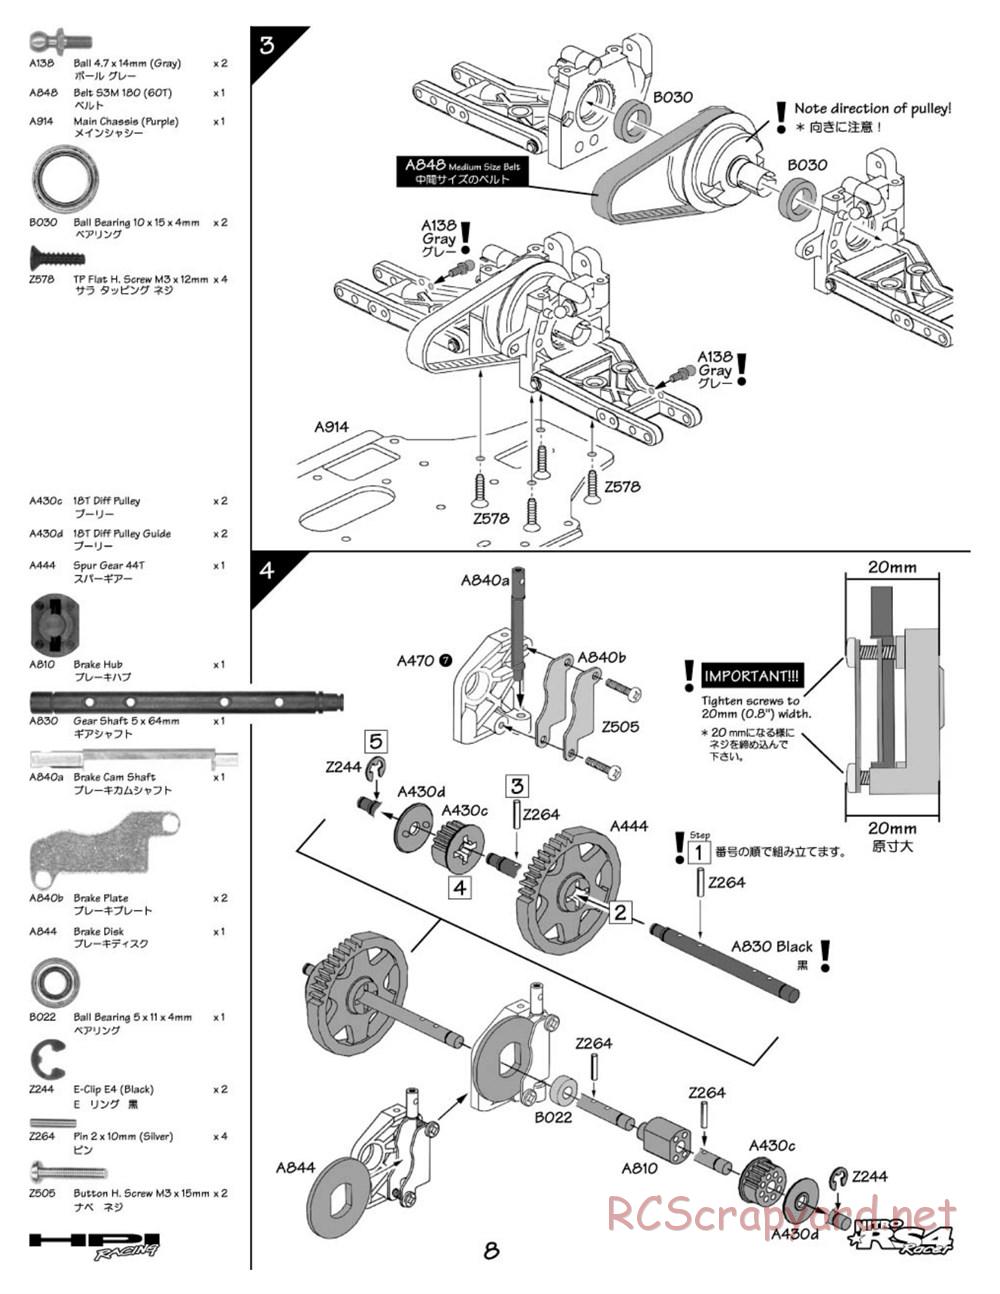 HPI - Nitro RS4 Racer Chassis - Manual - Page 8